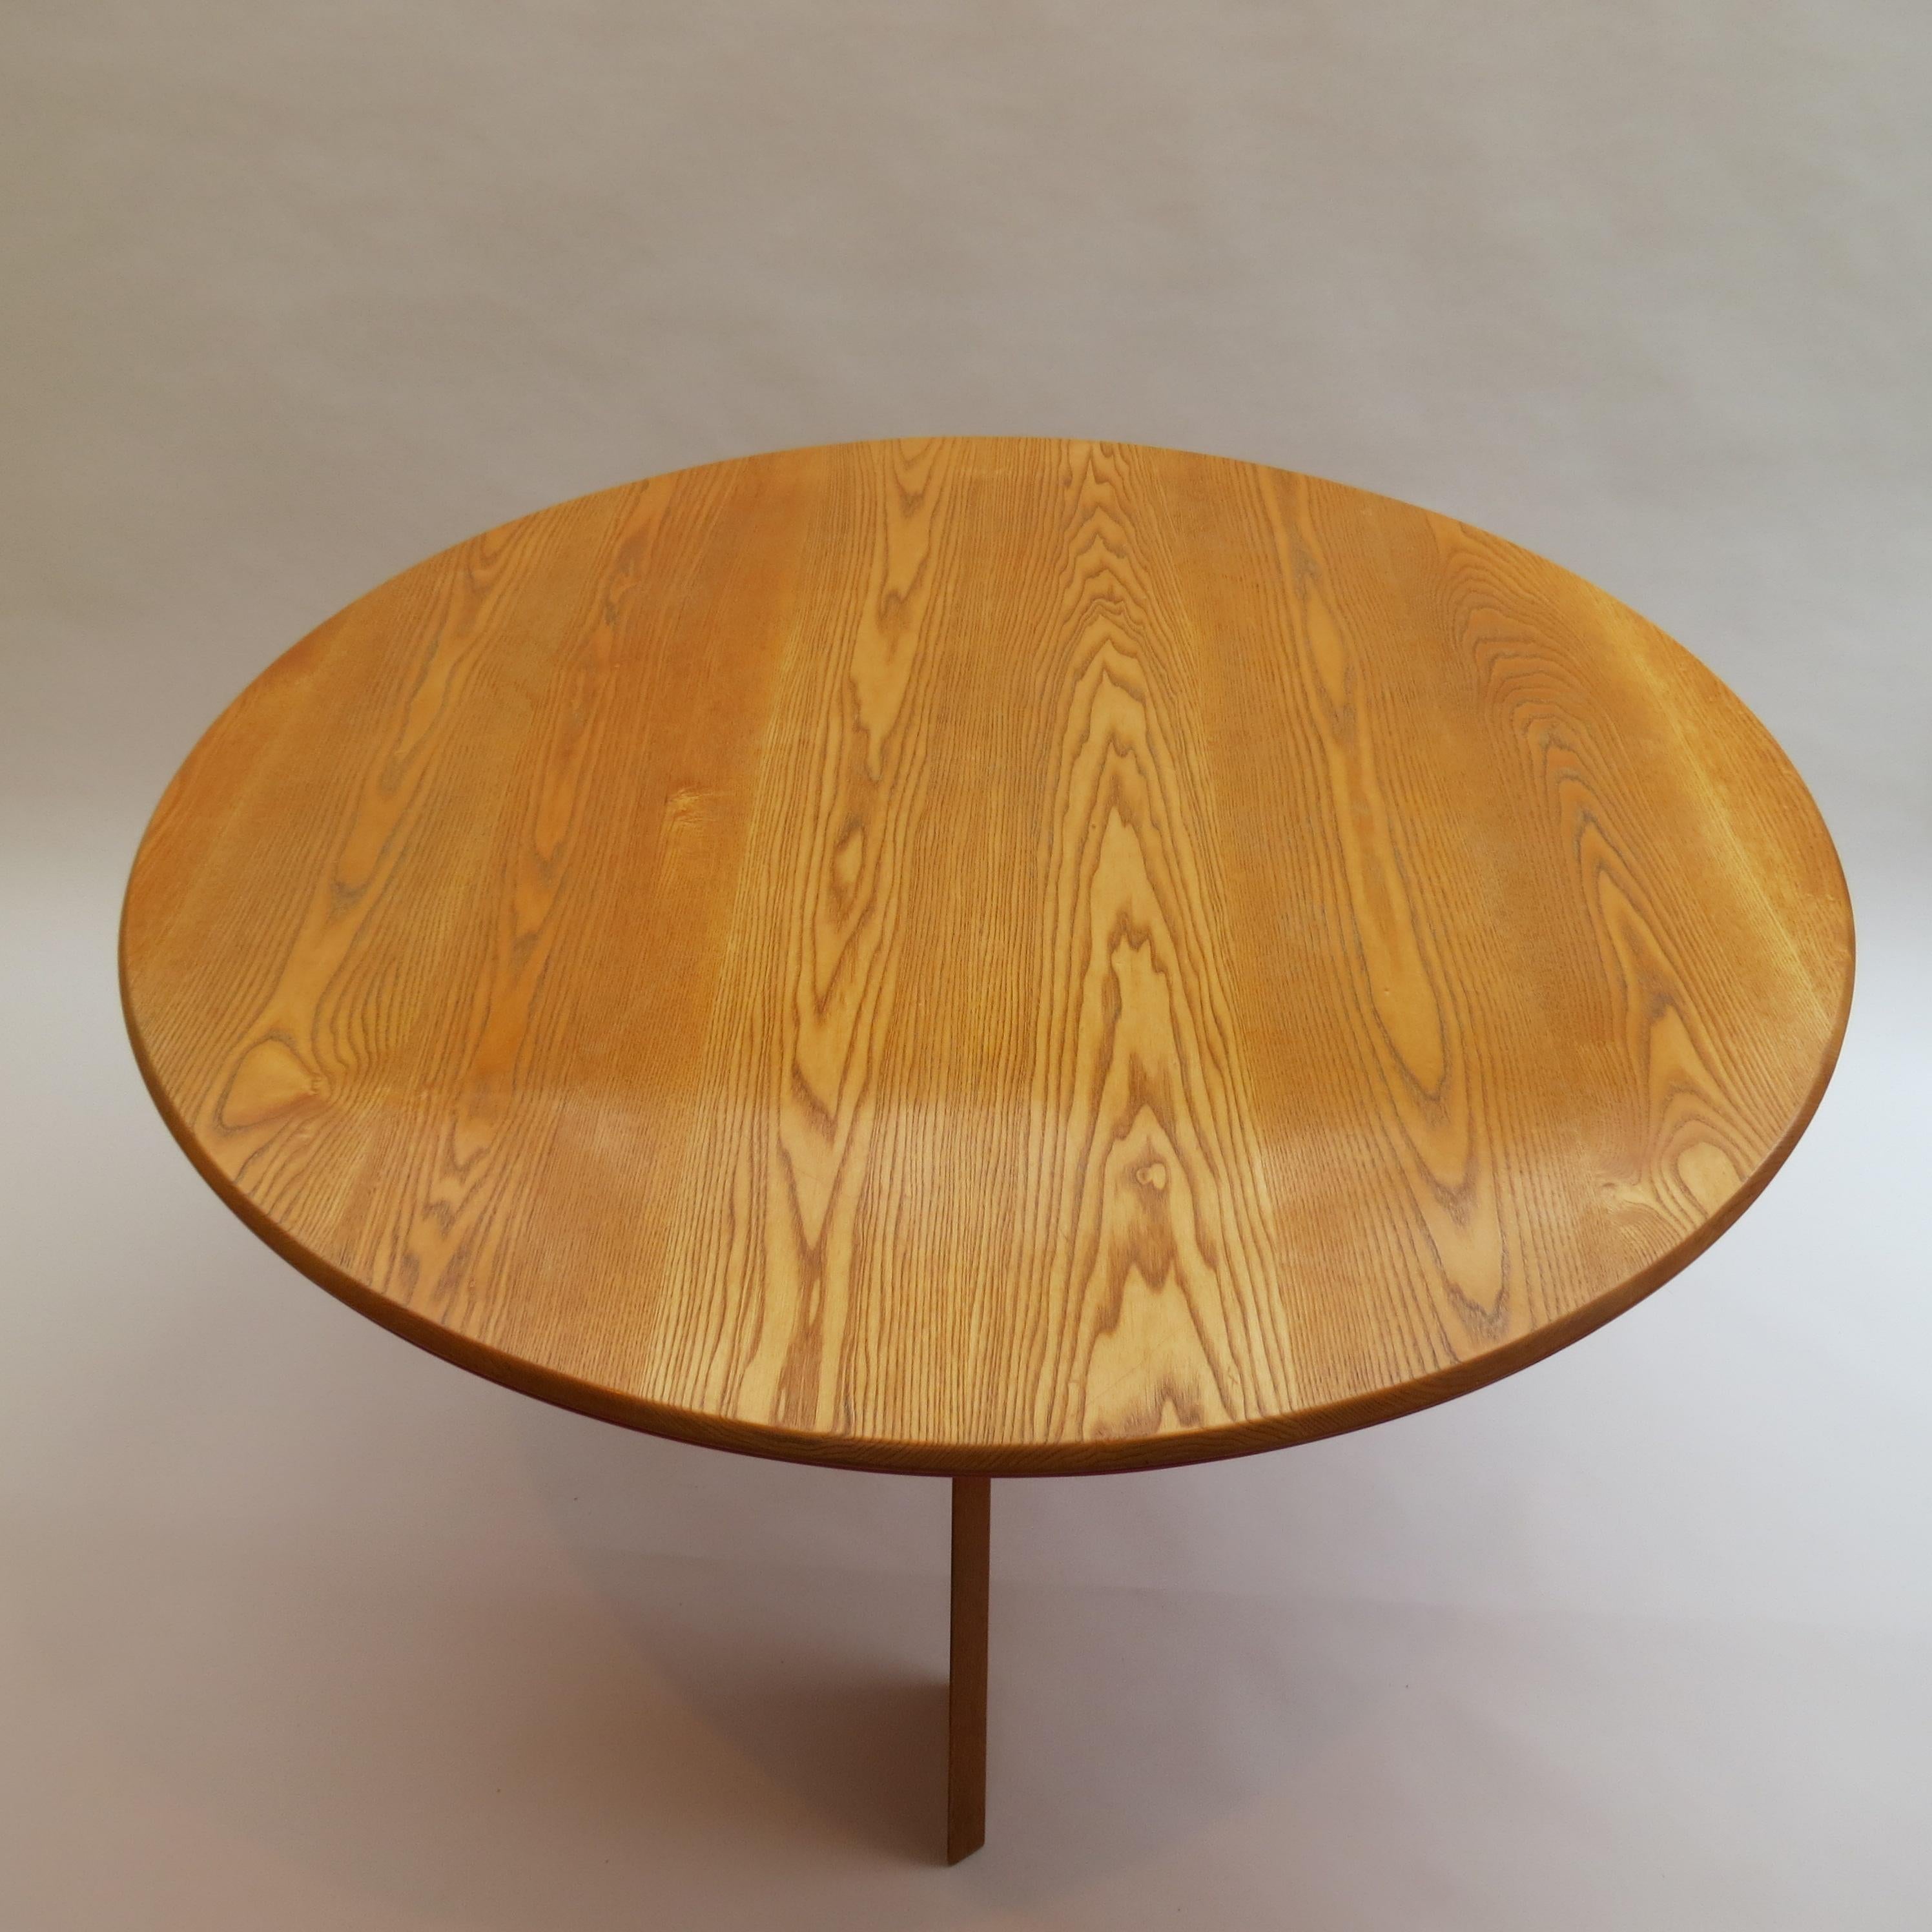 20th Century Midcentury Bespoke Round Dining Table by David Field 1980s with Red Blue Detail